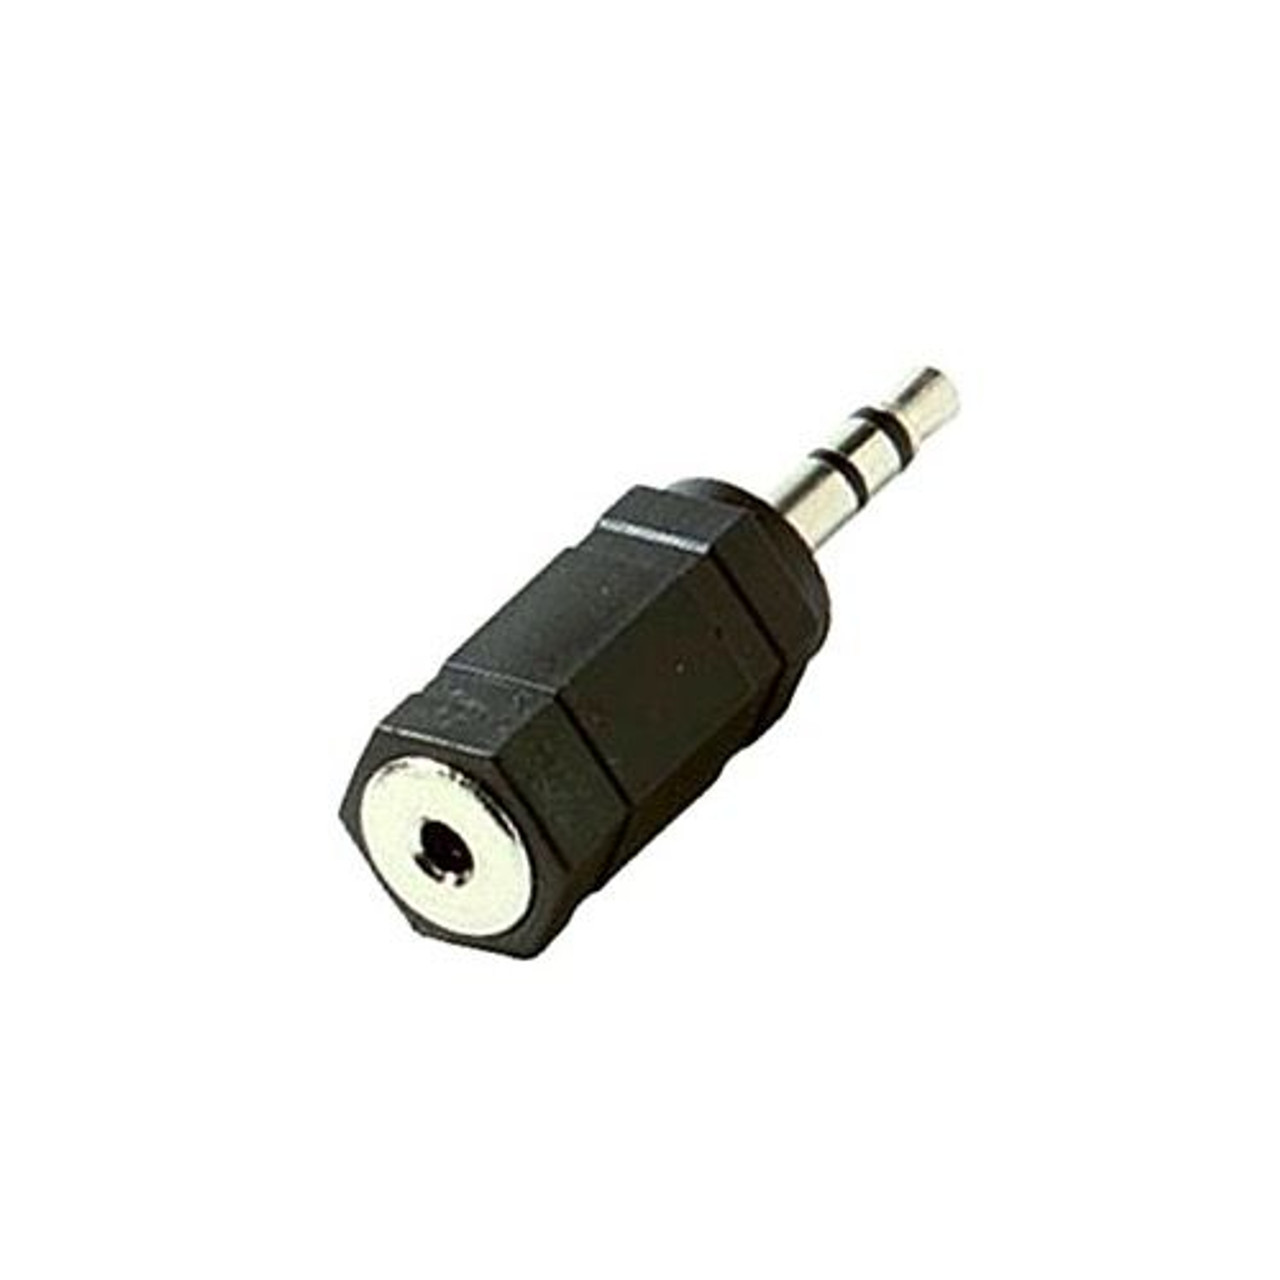 Eagle 2.5mm Female Stereo to 3.5mm Stereo Male Adapter Plug Stereo 3.5 mm Male to 2.5 mm Female Stereo Headphone Audio Jack Signal MP3 Plug Connector